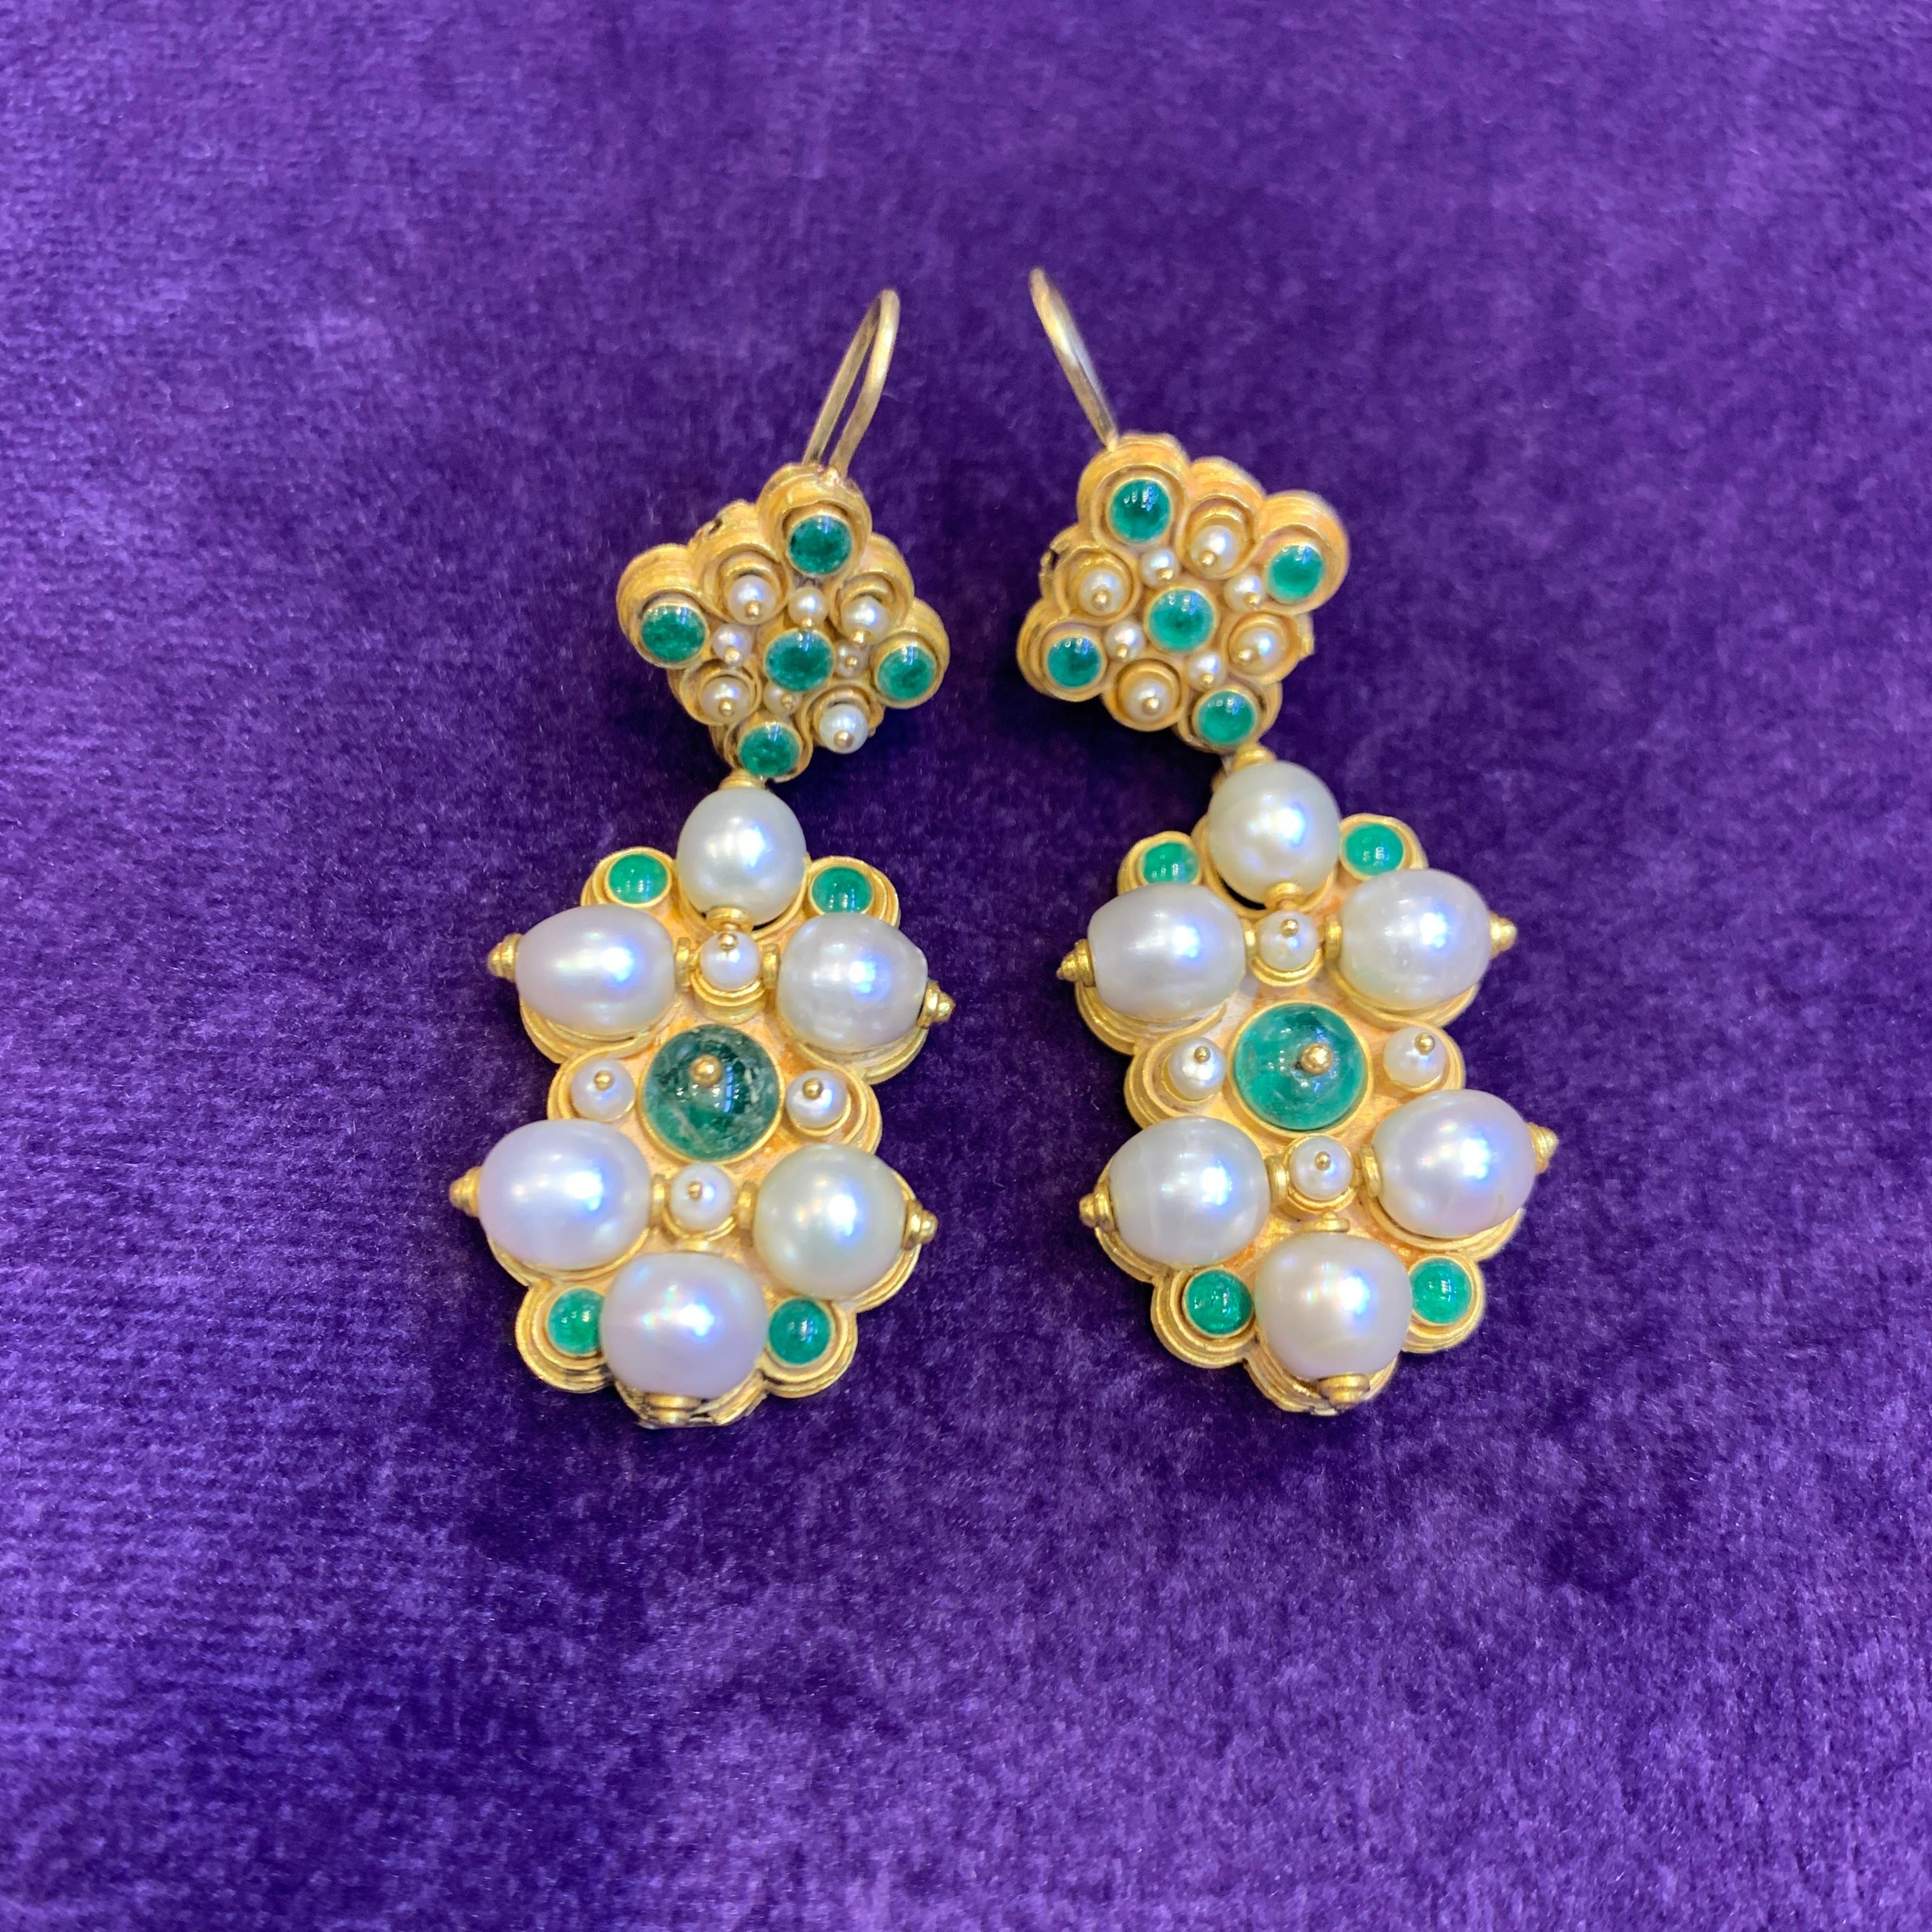 Antique Emerald Pearl & Enamel Earrings In Excellent Condition For Sale In New York, NY